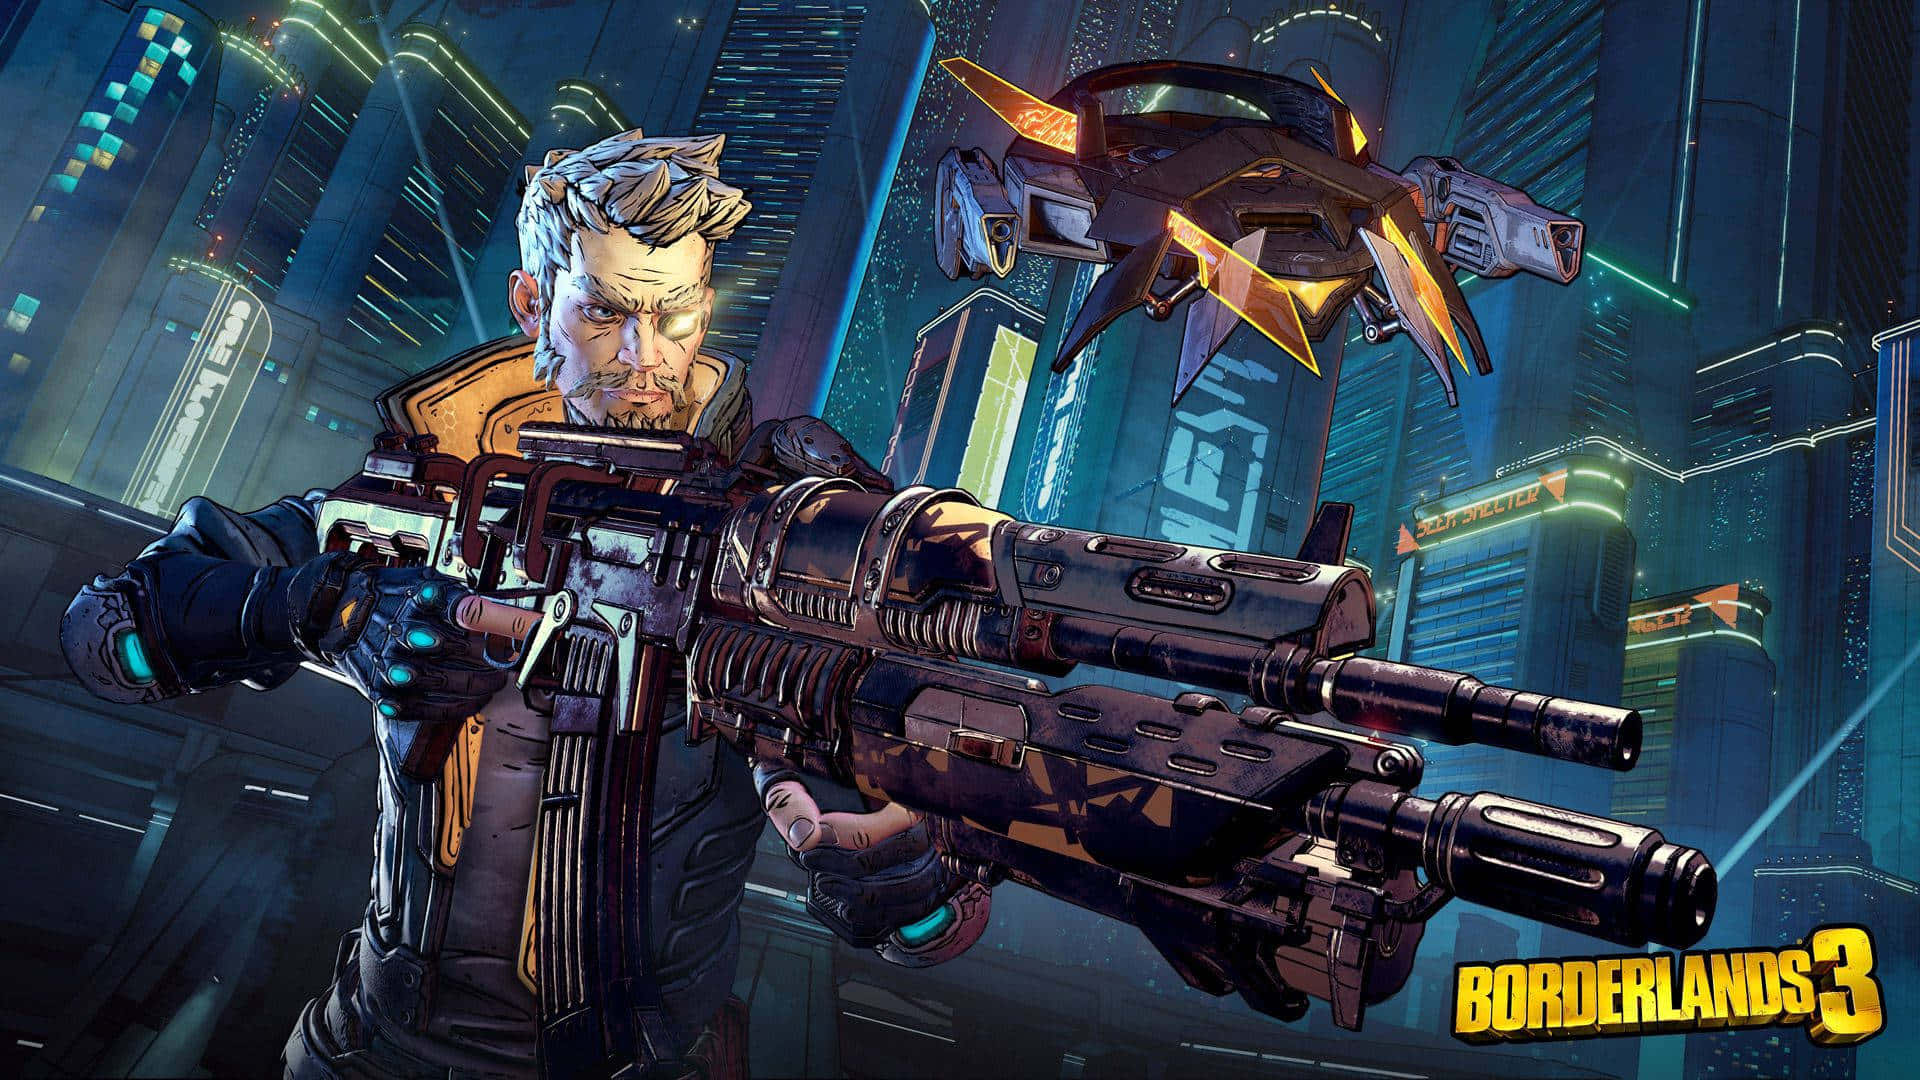 "Explore the world of Pandora with the highly anticipated Borderlands 3 video game".